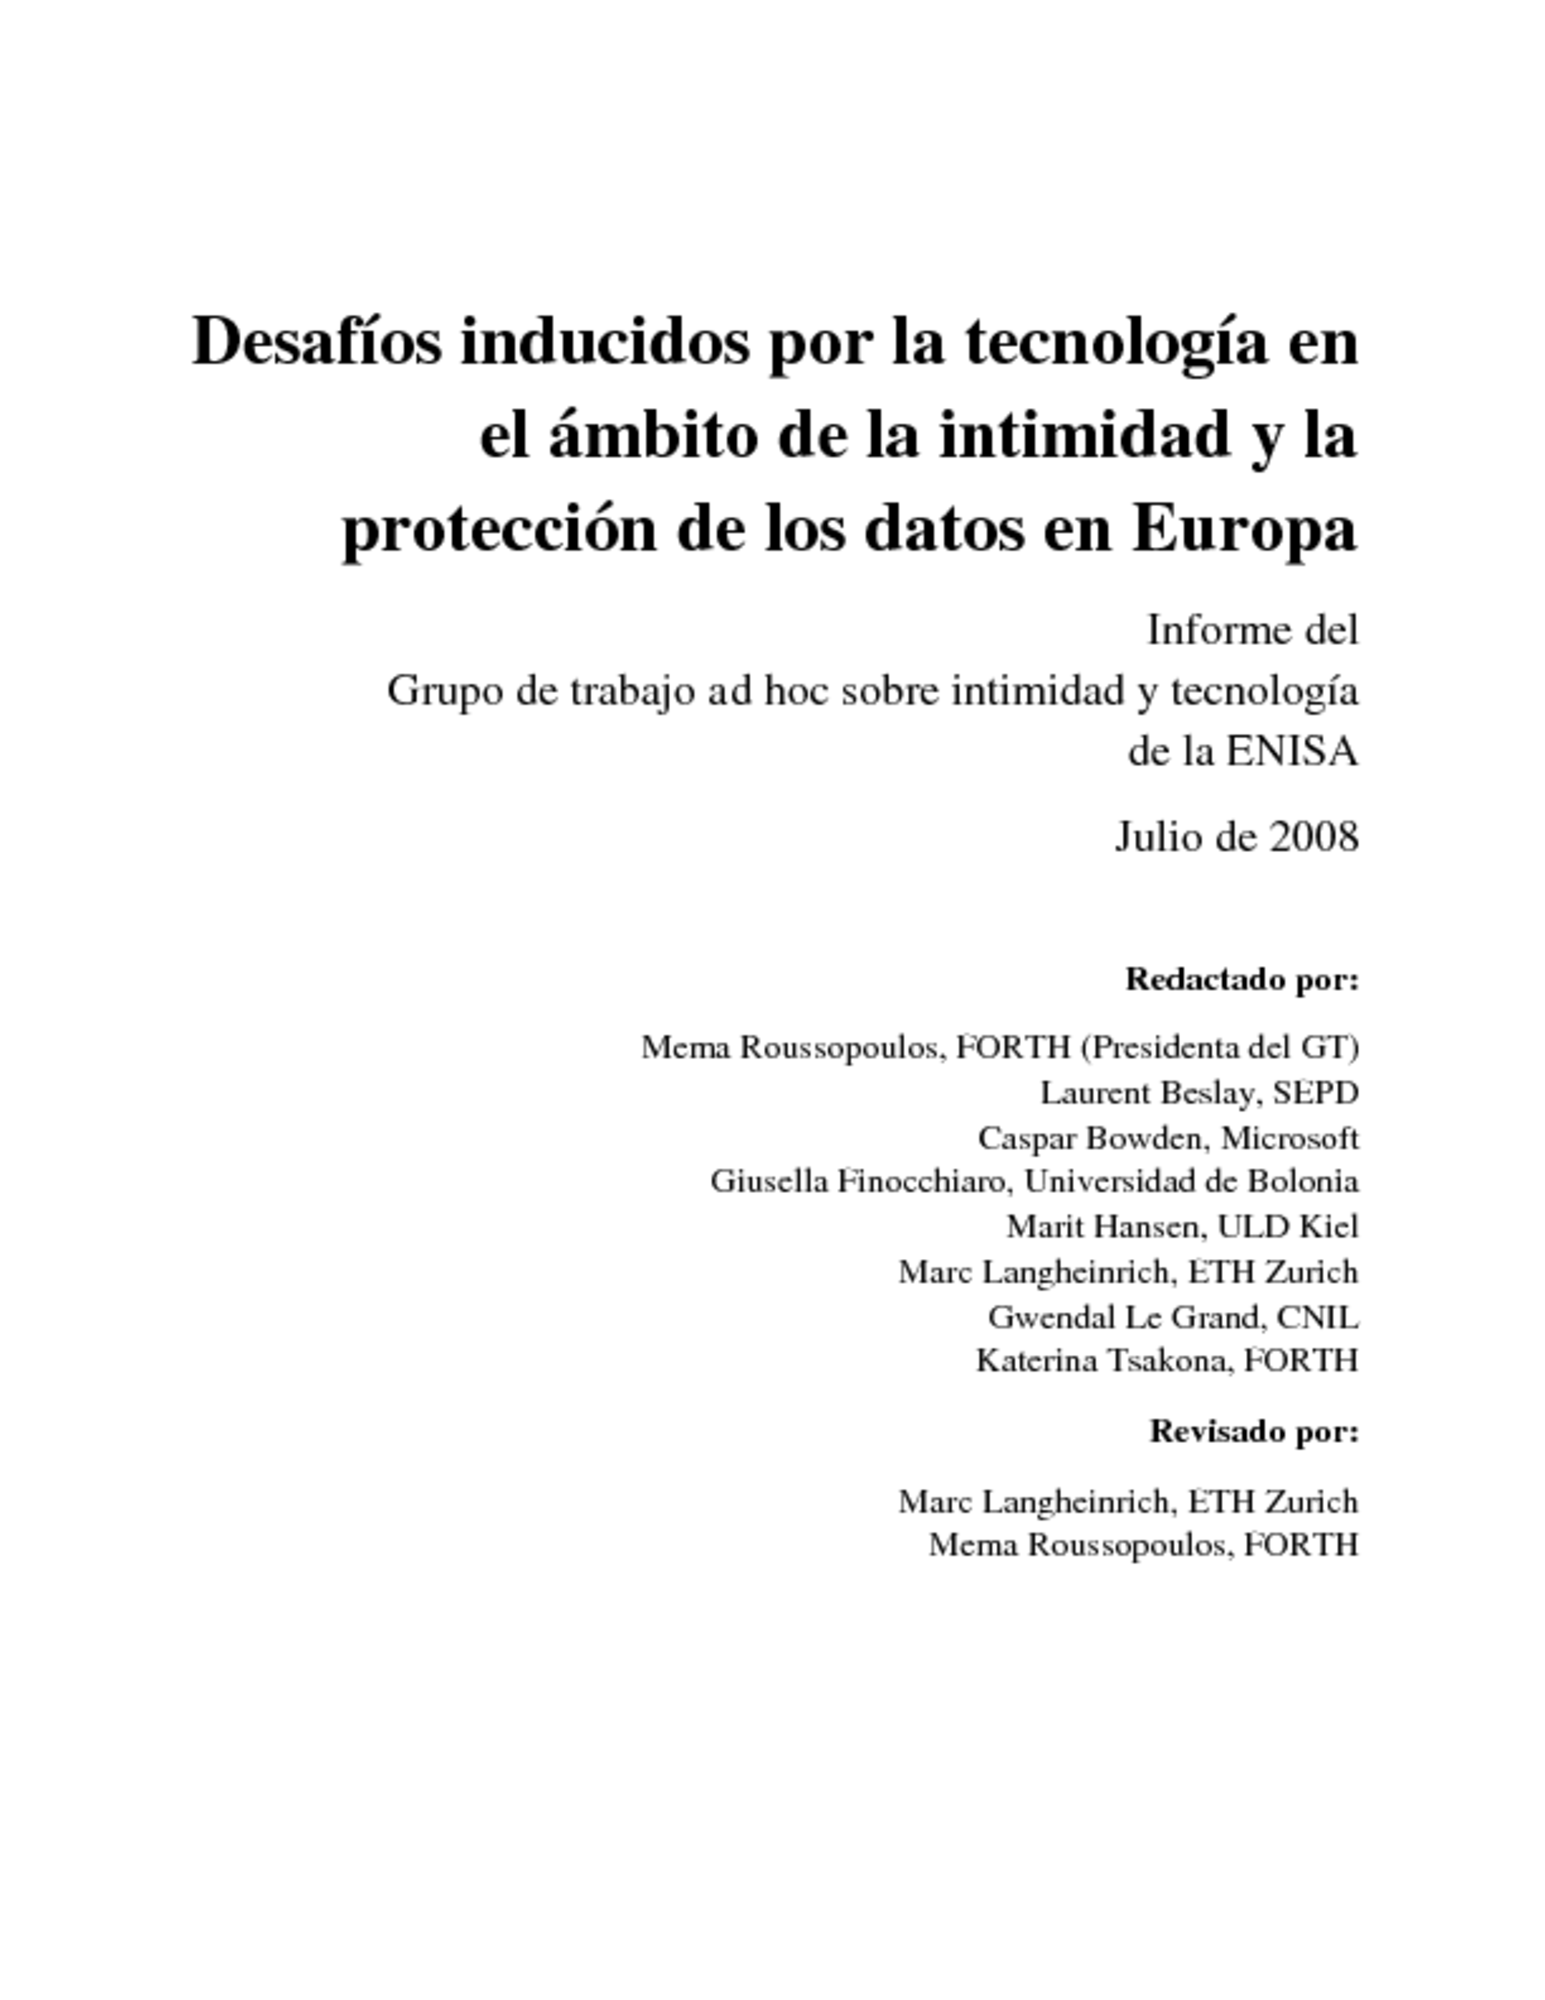 Technology Induced Challenges In Privacy And Data Protection In Europe Spanish Version — Enisa 9670